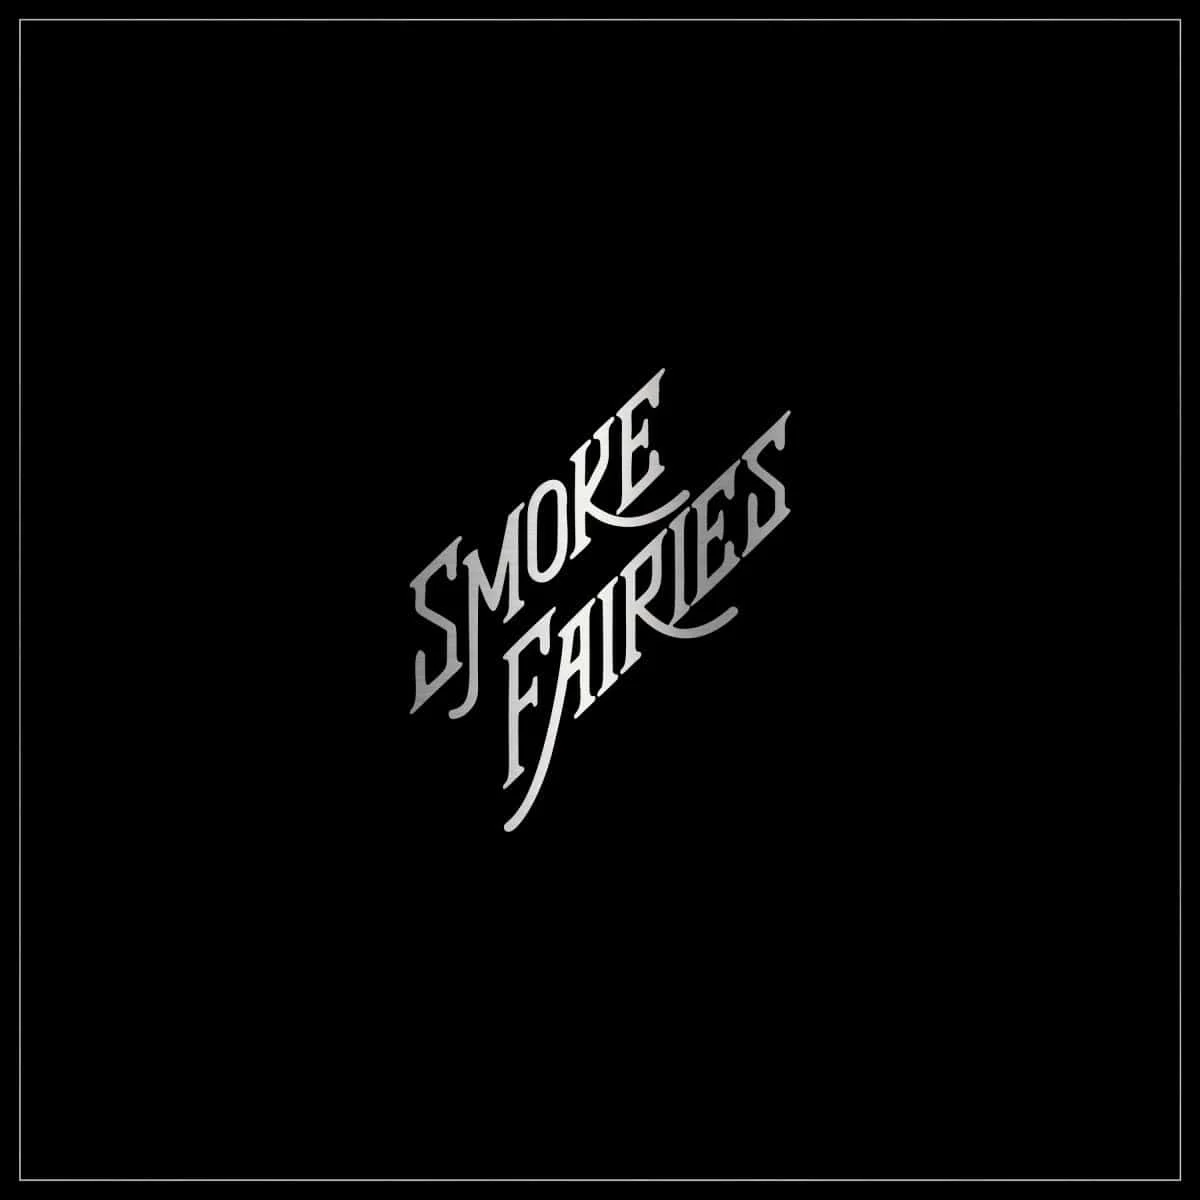 Smoke Fairies –  ‘Singles’ is out today!